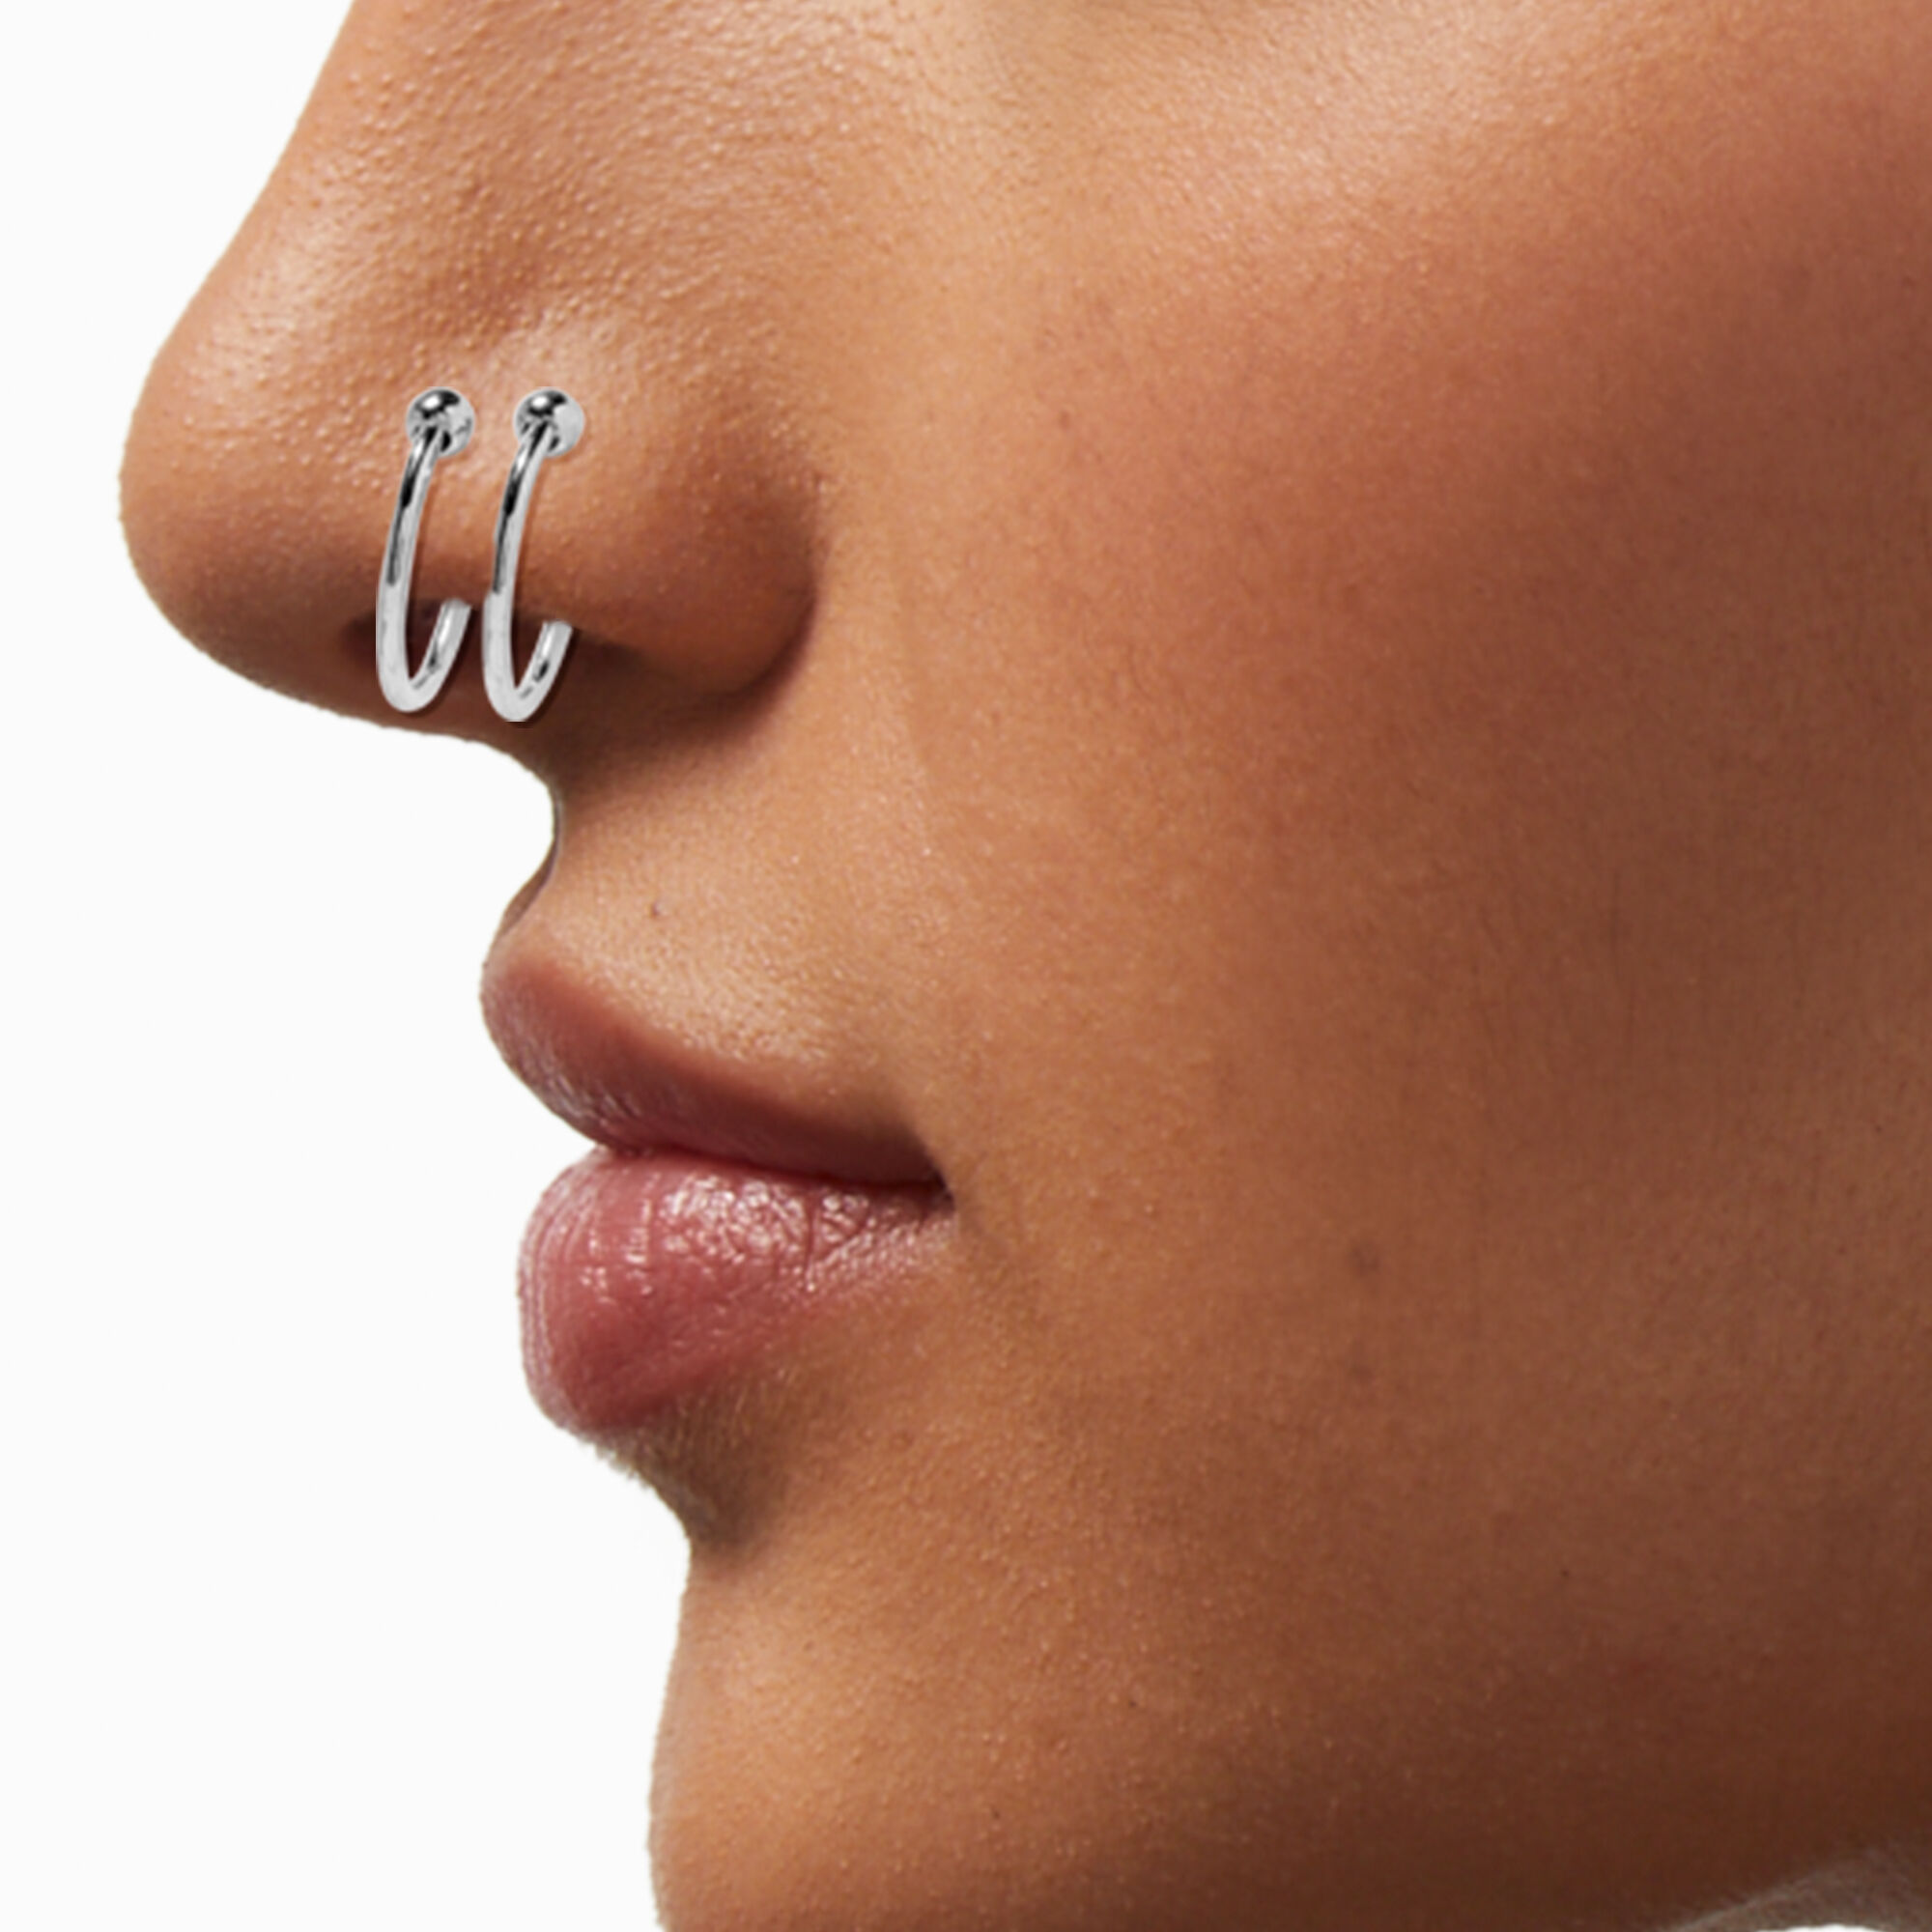 How to Put in a Nose Ring